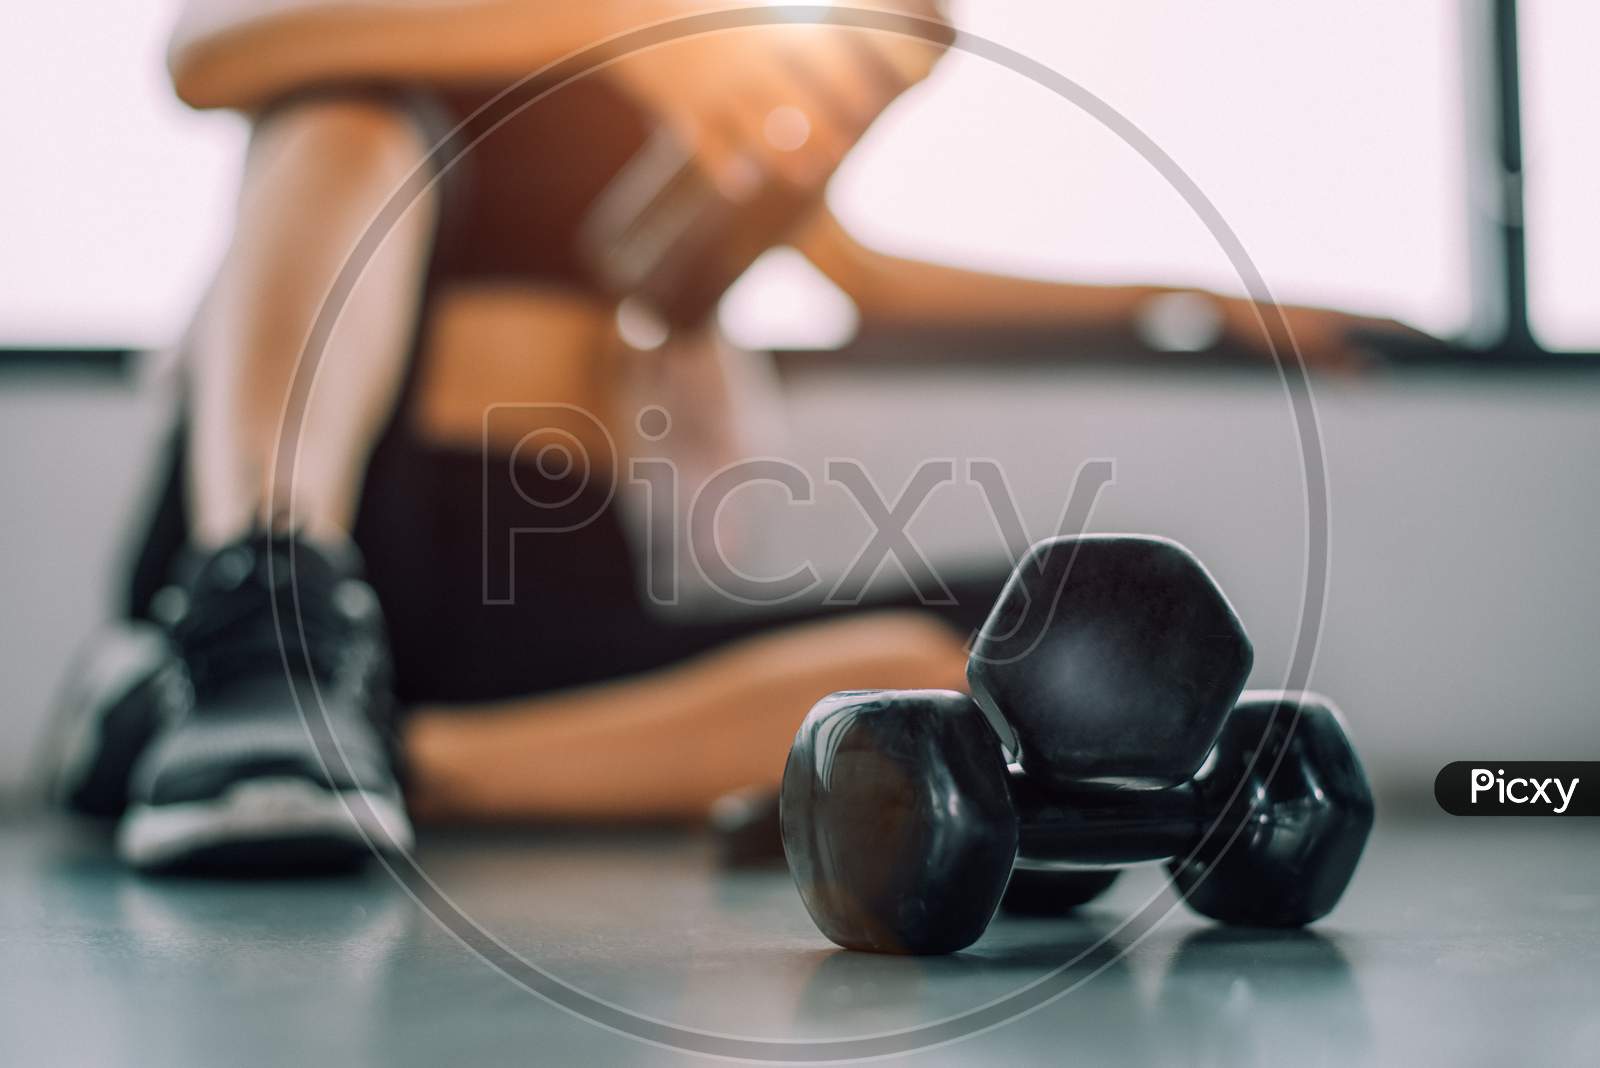 Close Up Of Dumbbell With Exercise Woman Lifestyle Workout In Gym Fitness Breaking Relax After Sport Training With Protein Shake Bottle Background. Healthy Lifestyle Bodybuilding Athlete Muscles